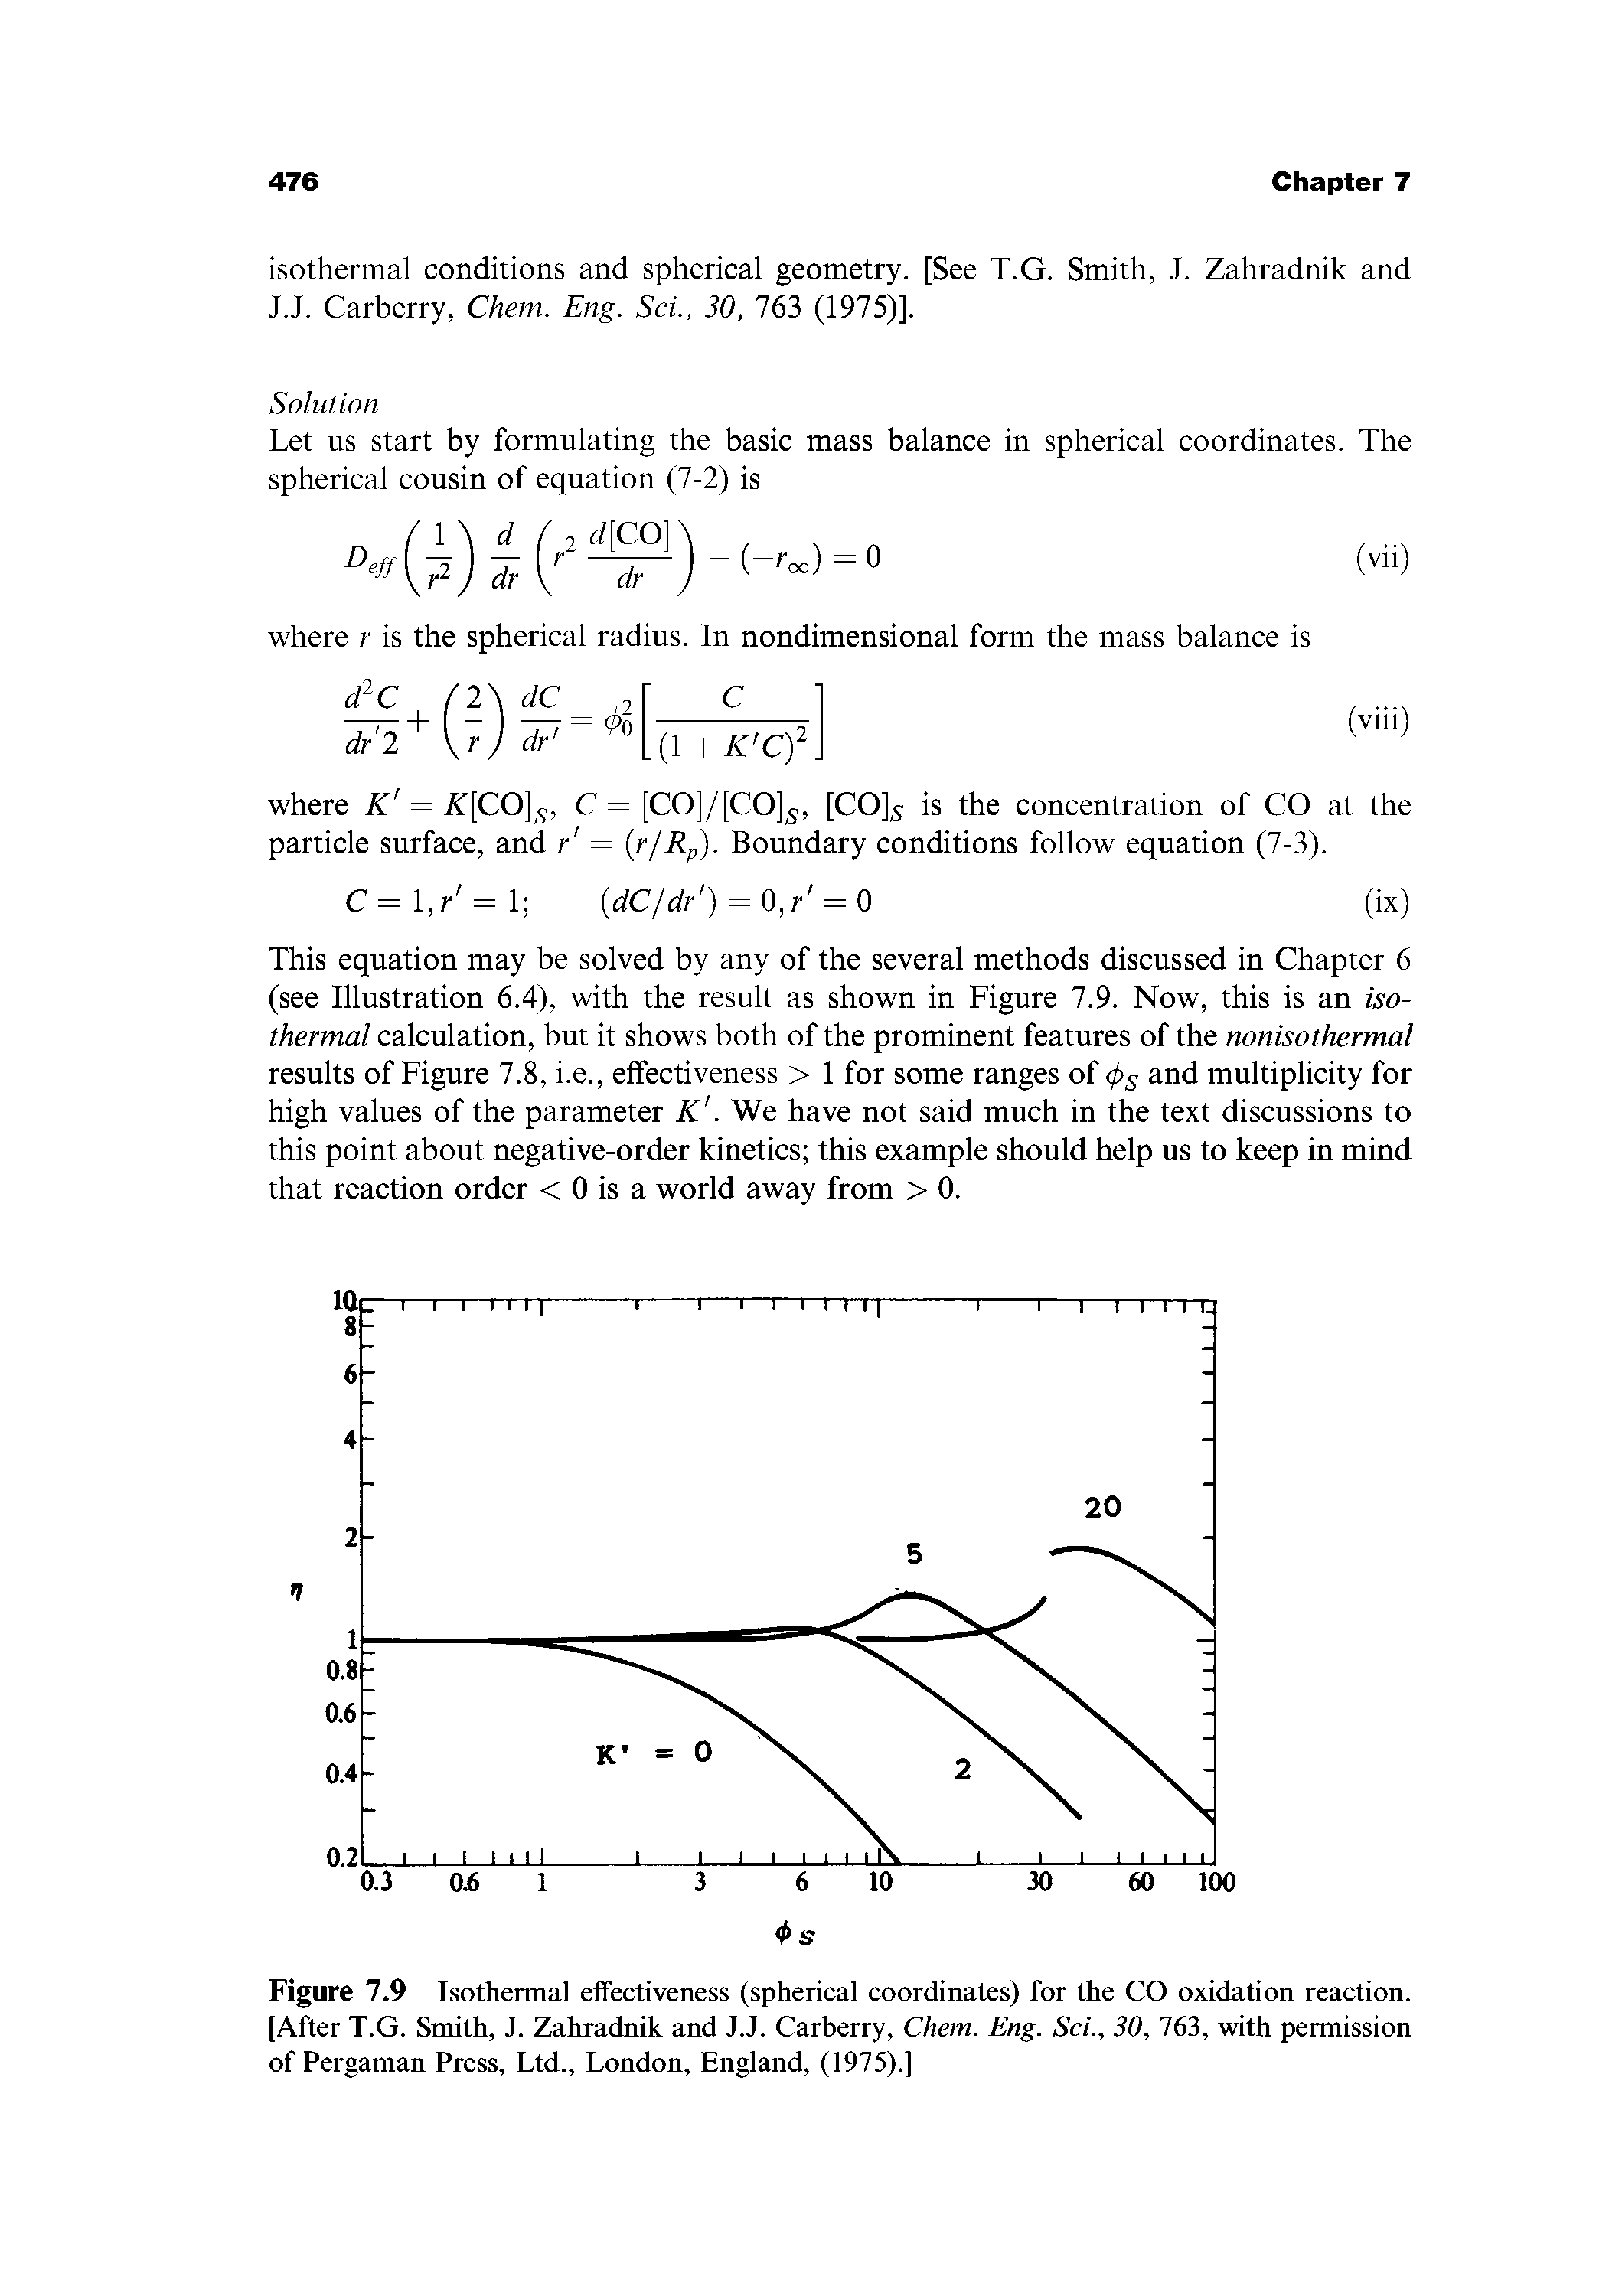 Figure 7.9 Isothermal effectiveness (spherical coordinates) for the CO oxidation reaction. [After T.G. Smith, J. Zahradnik and J.J. Carberry, Chem. Eng. Sci., 30, 763, with permission of Pergaman Press, Ltd., London, England, (1975).]...